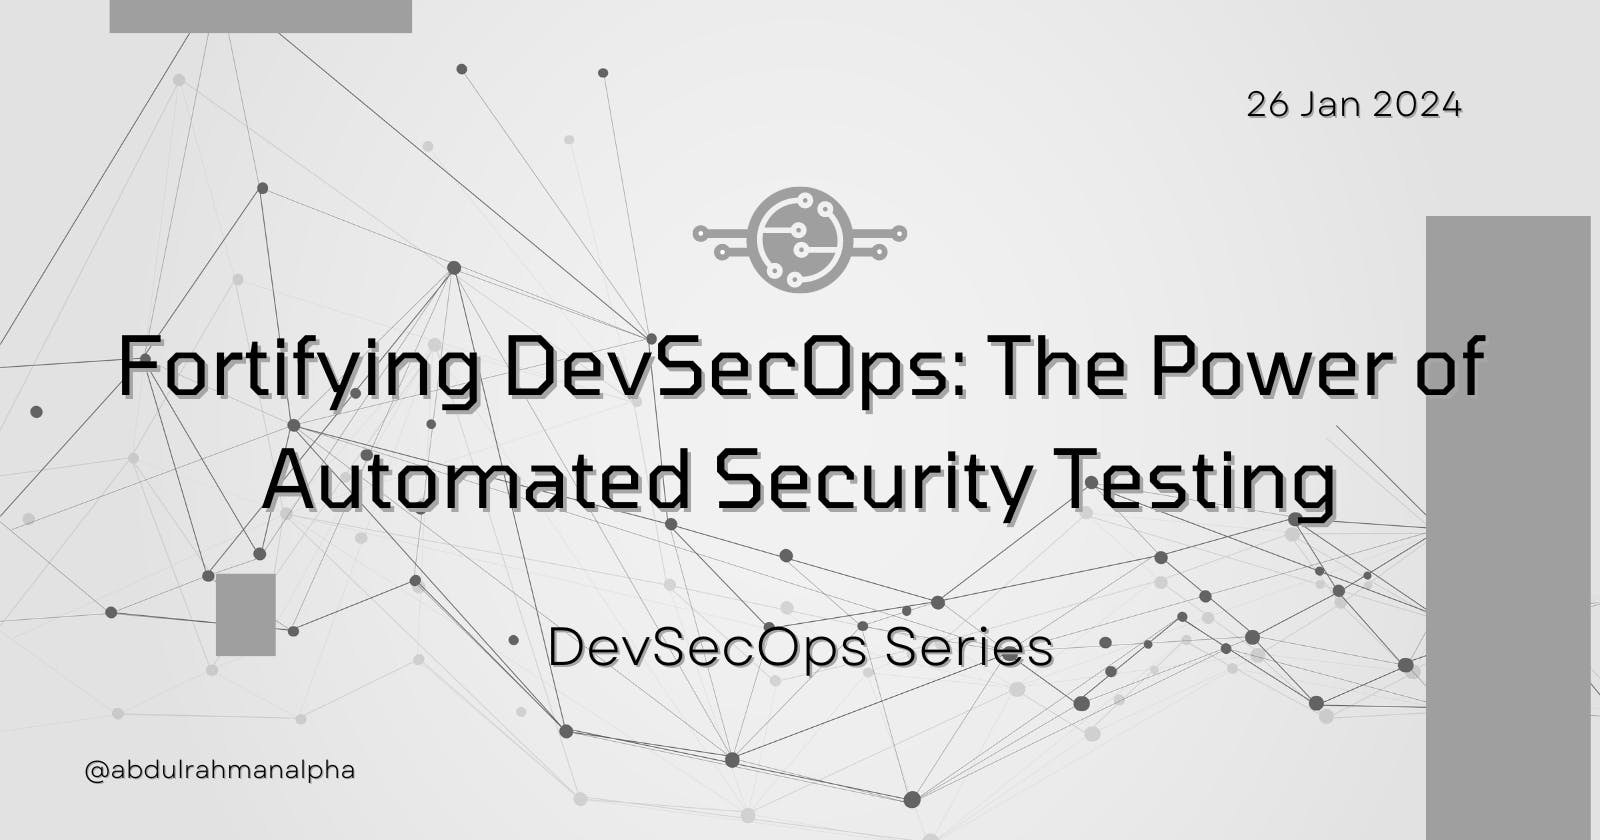 Fortifying DevSecOps: The Power of Automated Security Testing